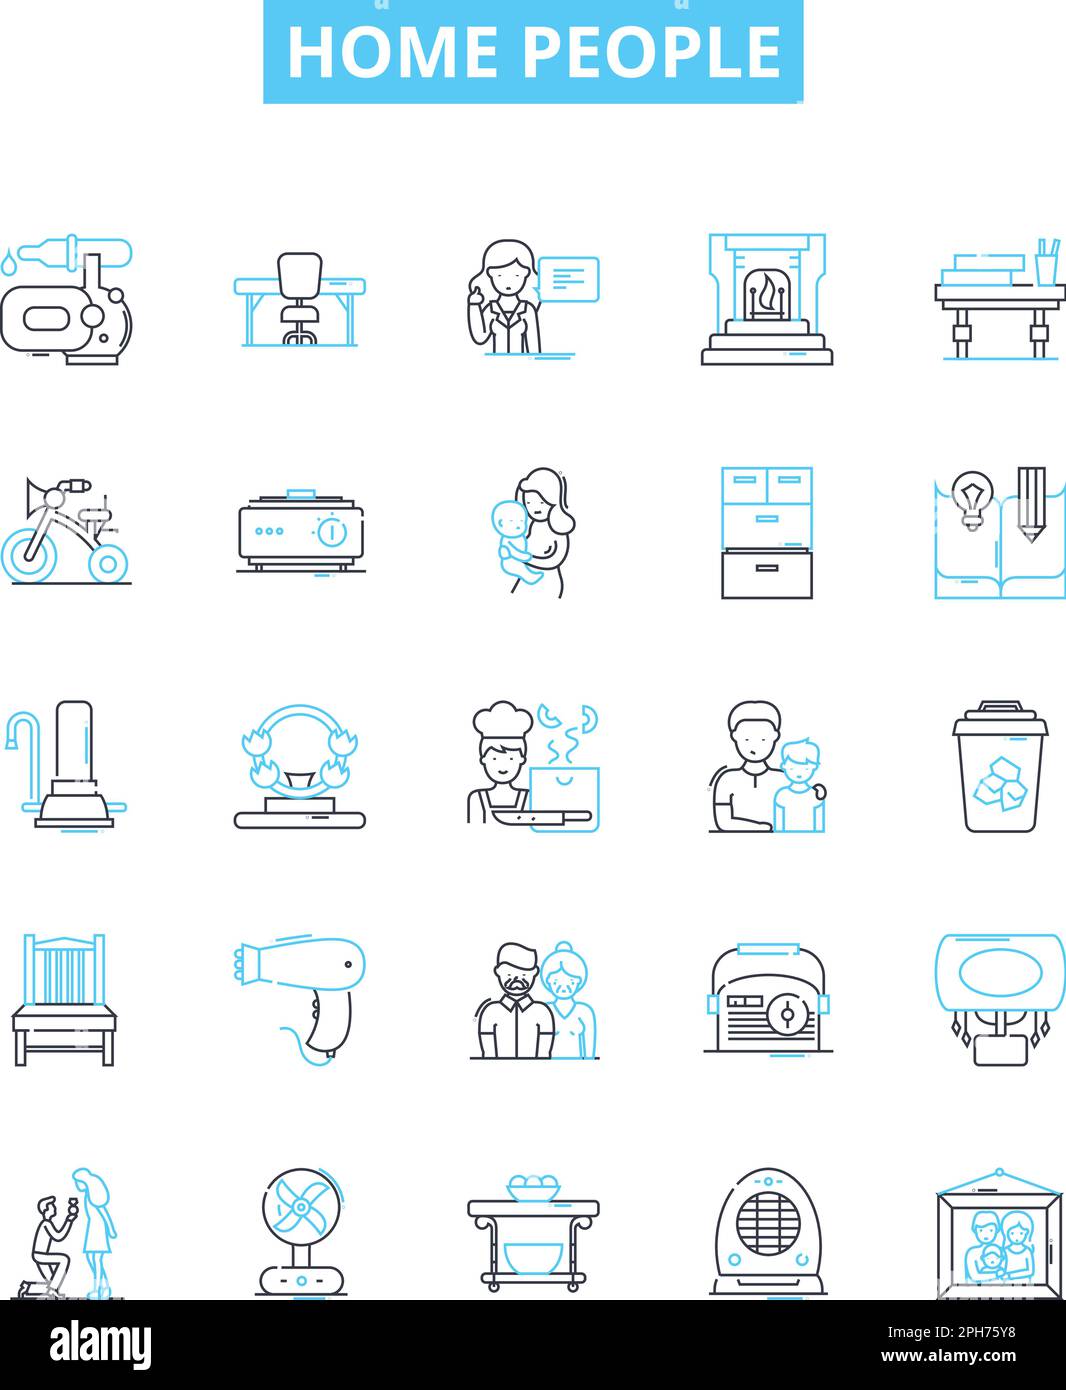 Home people vector line icons set. Homeowners, Dwellers, Residents, Housers, Occupiers, Inhabitants, Occupants illustration outline concept symbols Stock Vector